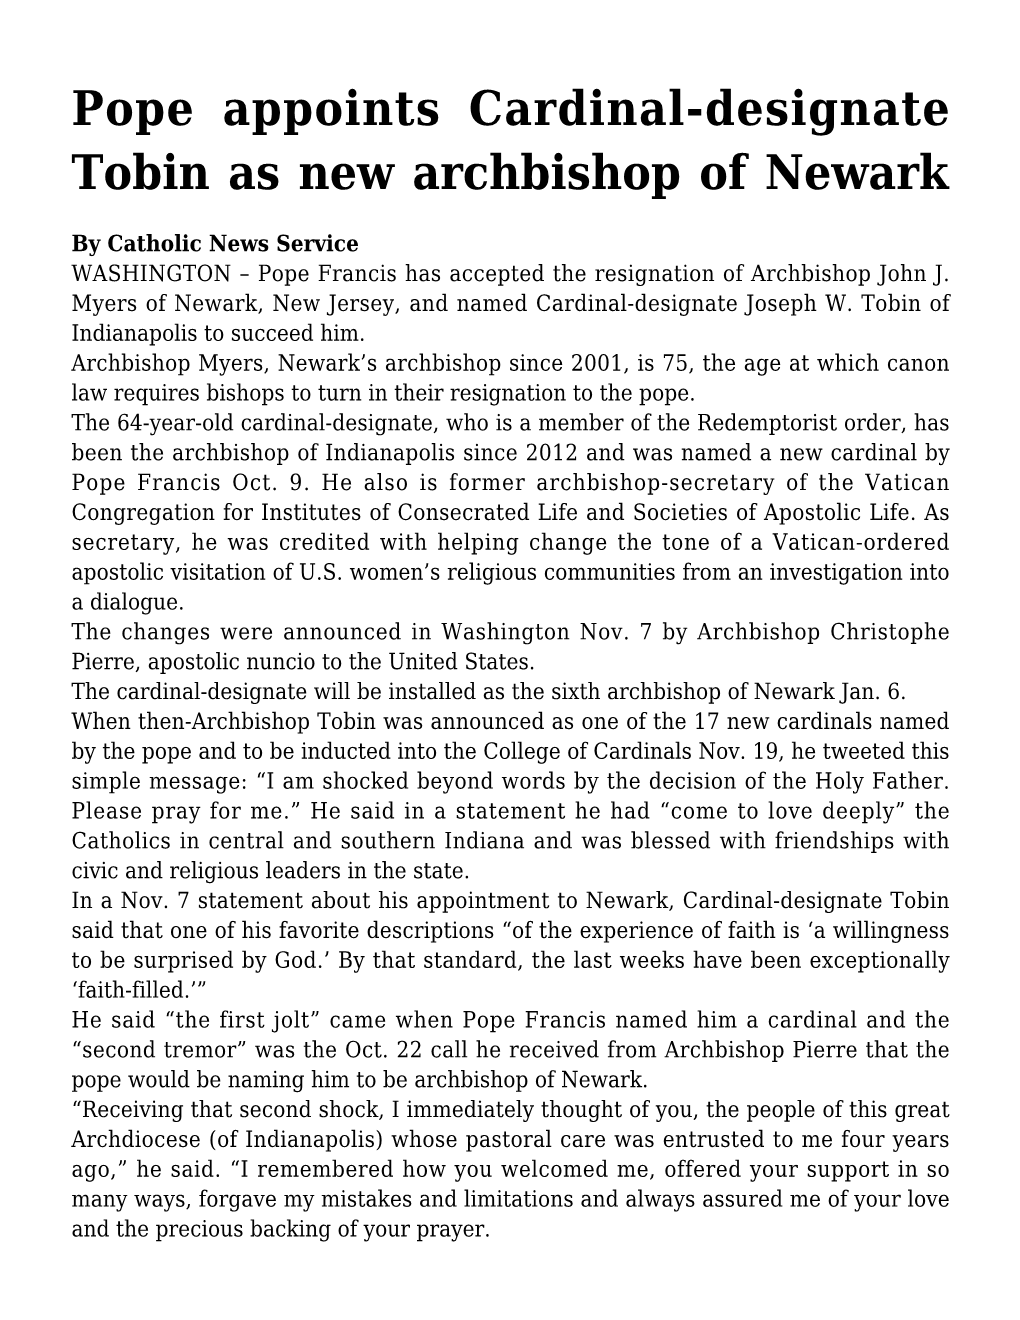 Pope Appoints Cardinal-Designate Tobin As New Archbishop of Newark